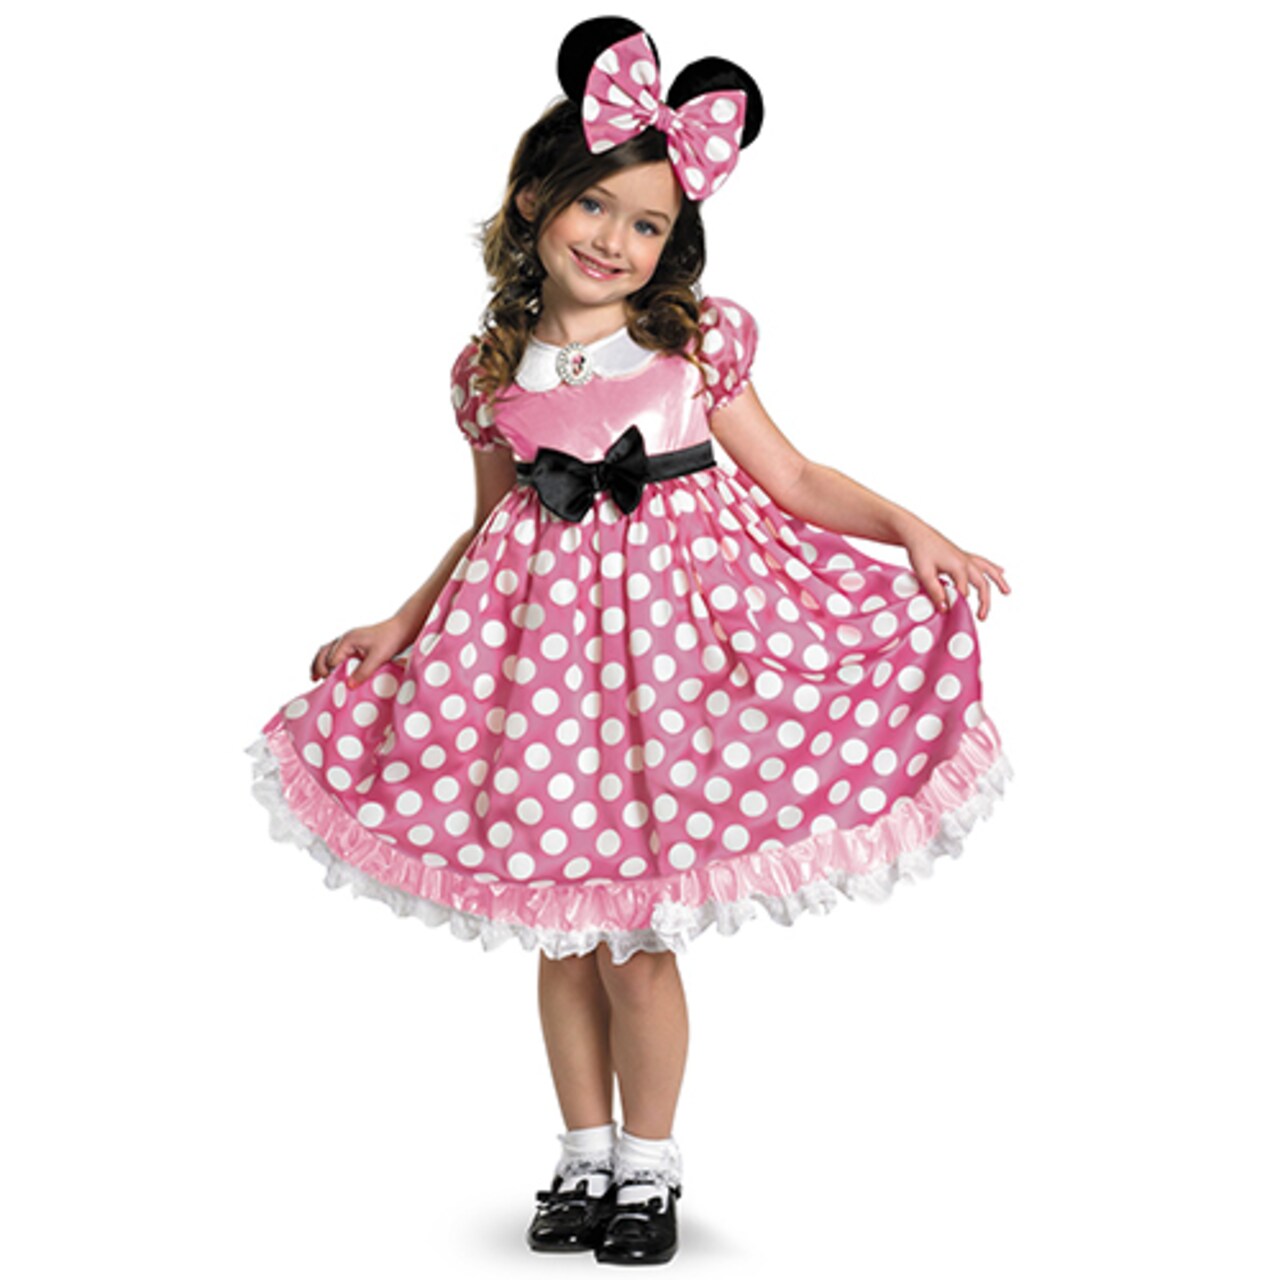 Minnie Mouse Glow in the Dark Girls Fancy Dress Costume - Small